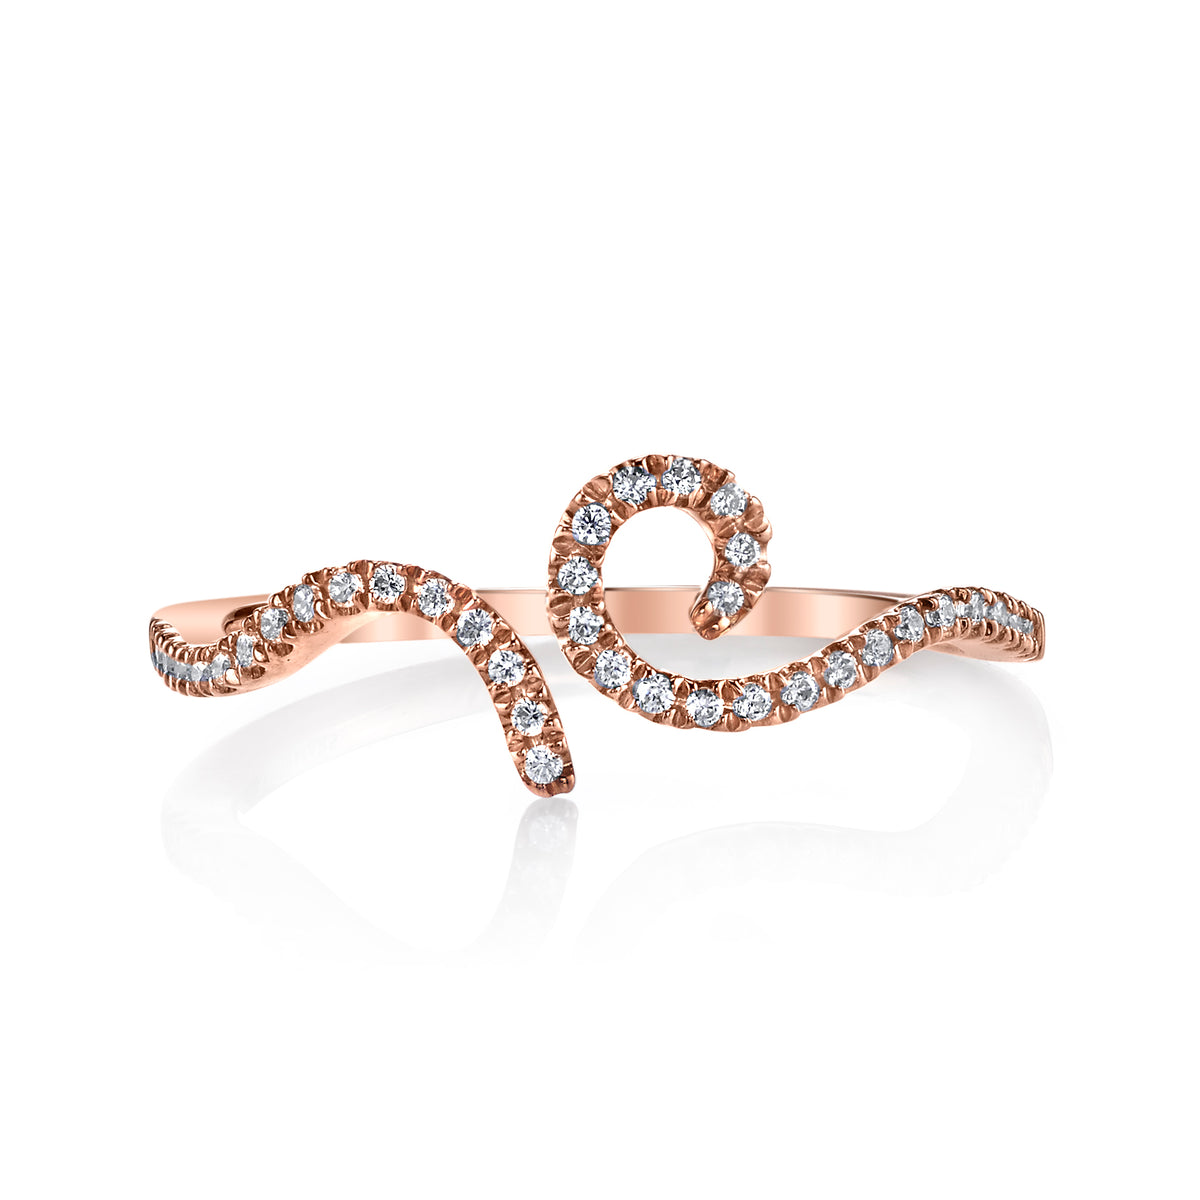 14K Rose Gold 0.15ct. Curving Diamond Accent Fashion Ring